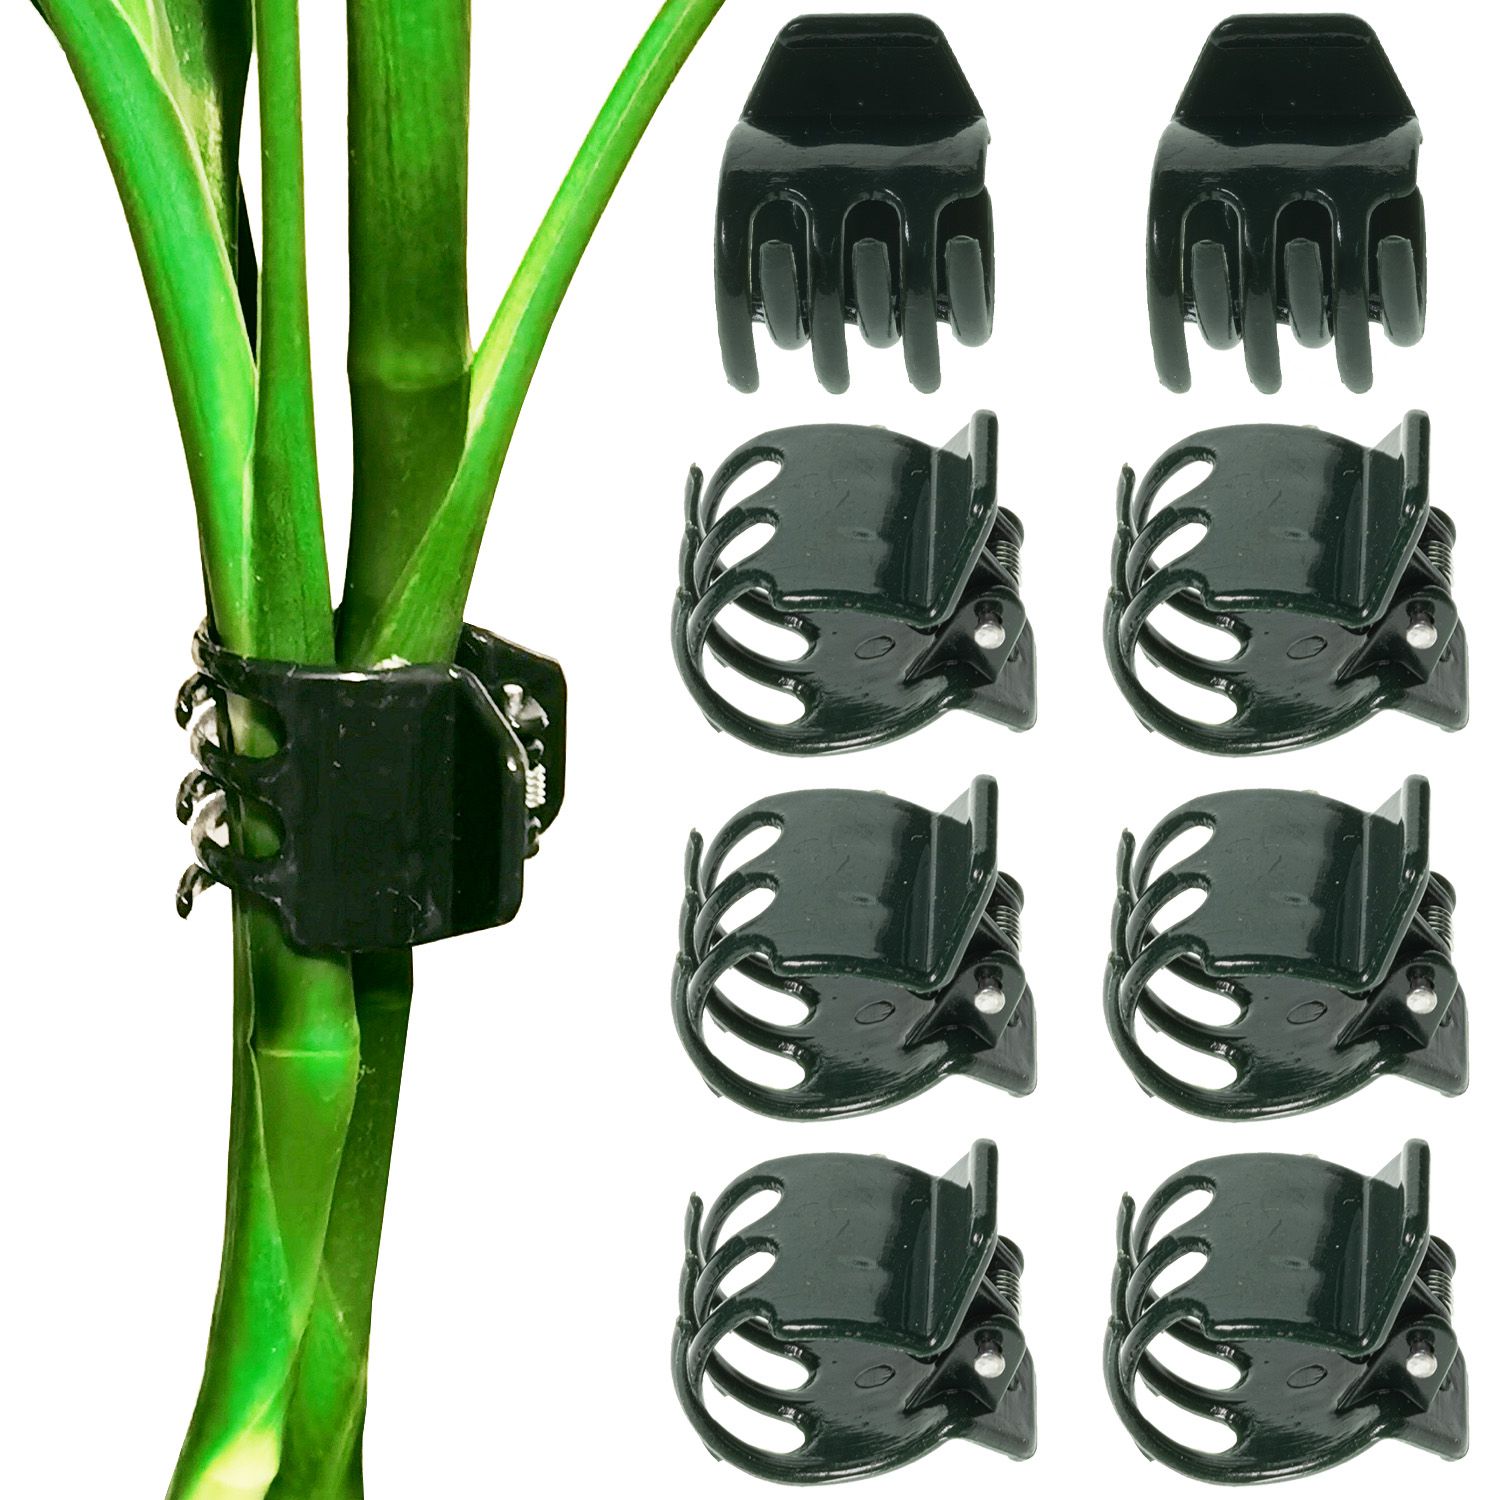 Byfri 100 Pcs Non-toxic Orchid Clips Eco-friendly Plastic Protect Stem Orchid Clips Garden Tools